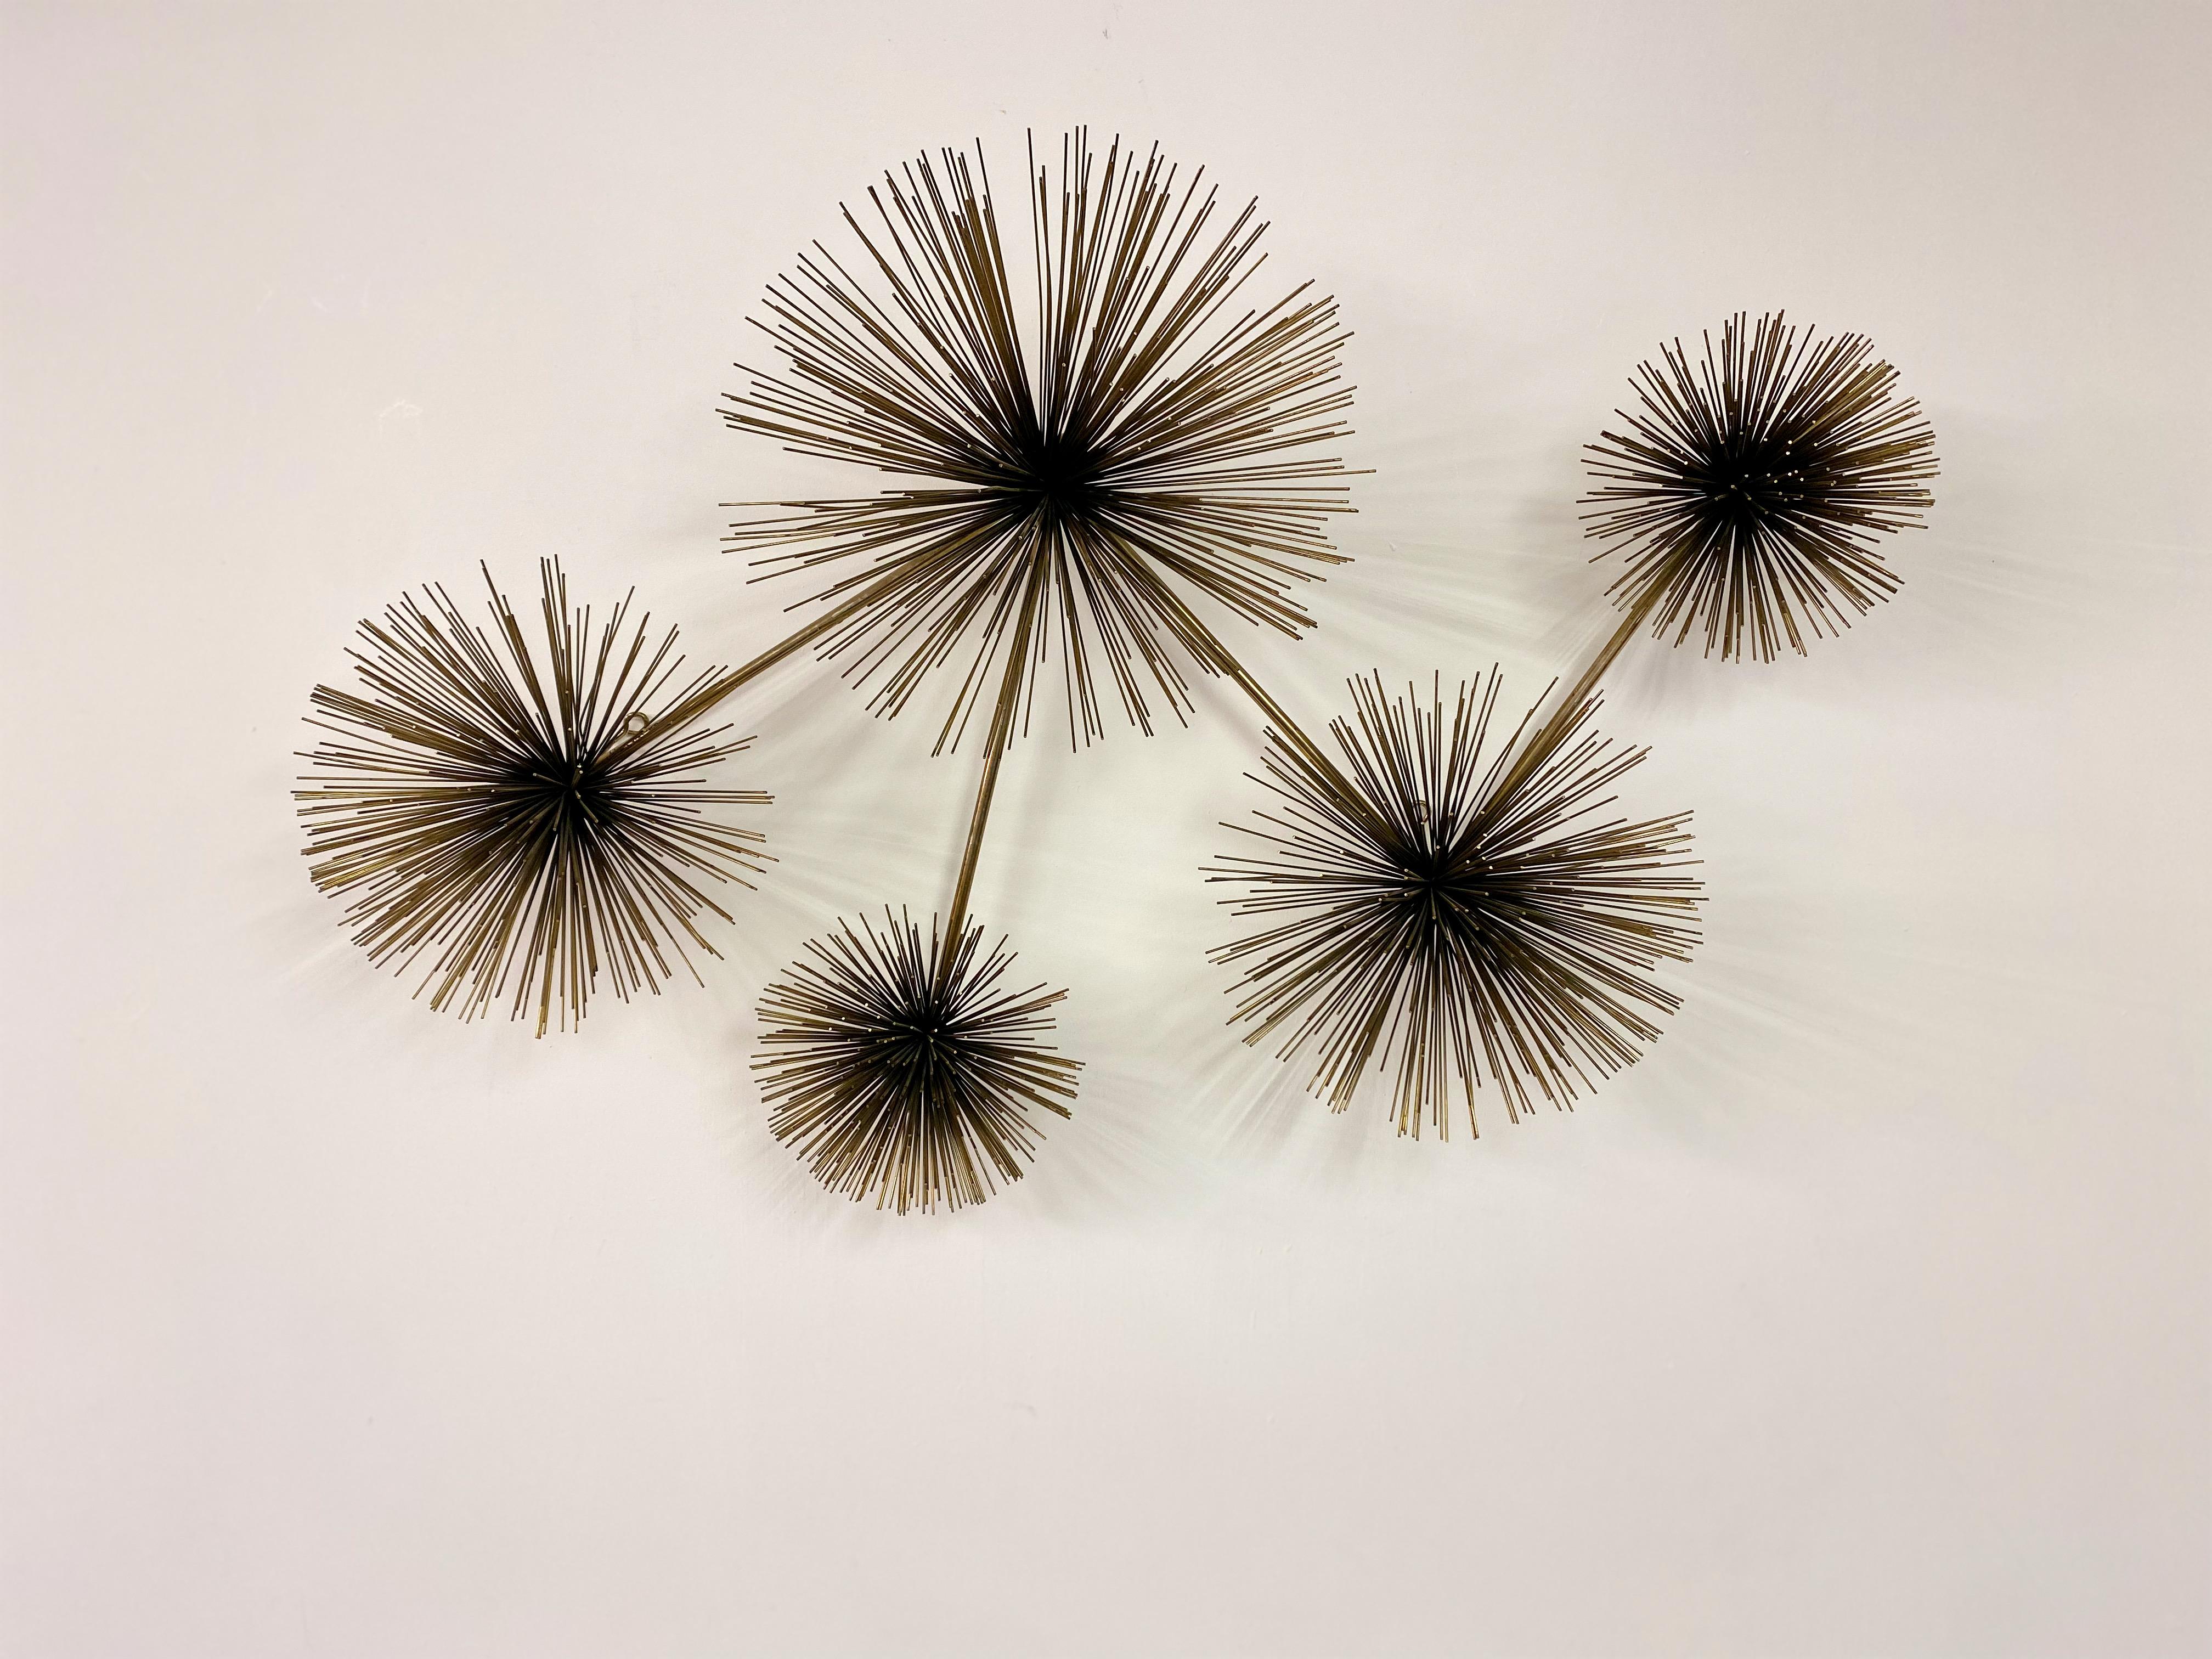 Mid-Century Modern 1970s Wall Mounted Starburst Sculpture By Curtis Jere For Sale